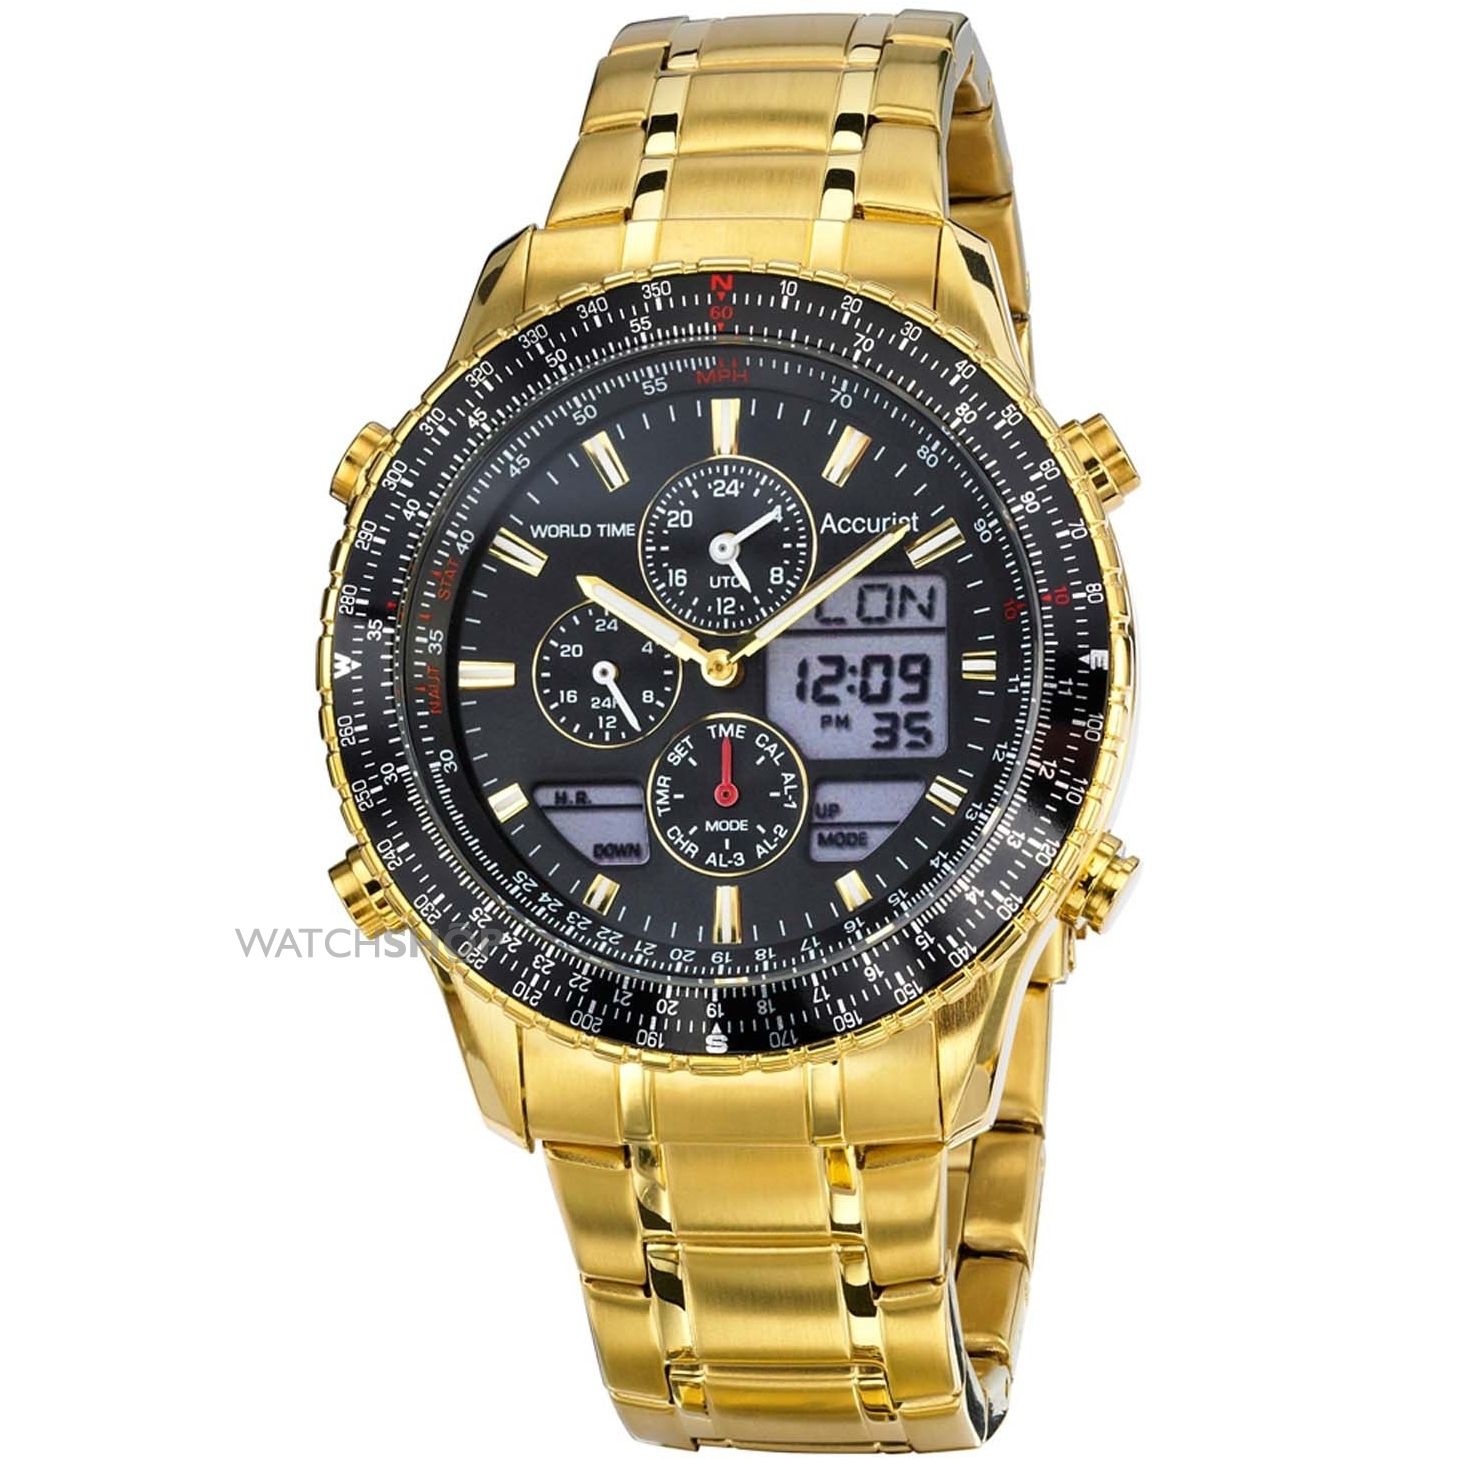 Accurist Men's Quartz Watch with Black Dial Analogue - Digital Display and Gold Stainless Steel Plated Bracelet MB1030B